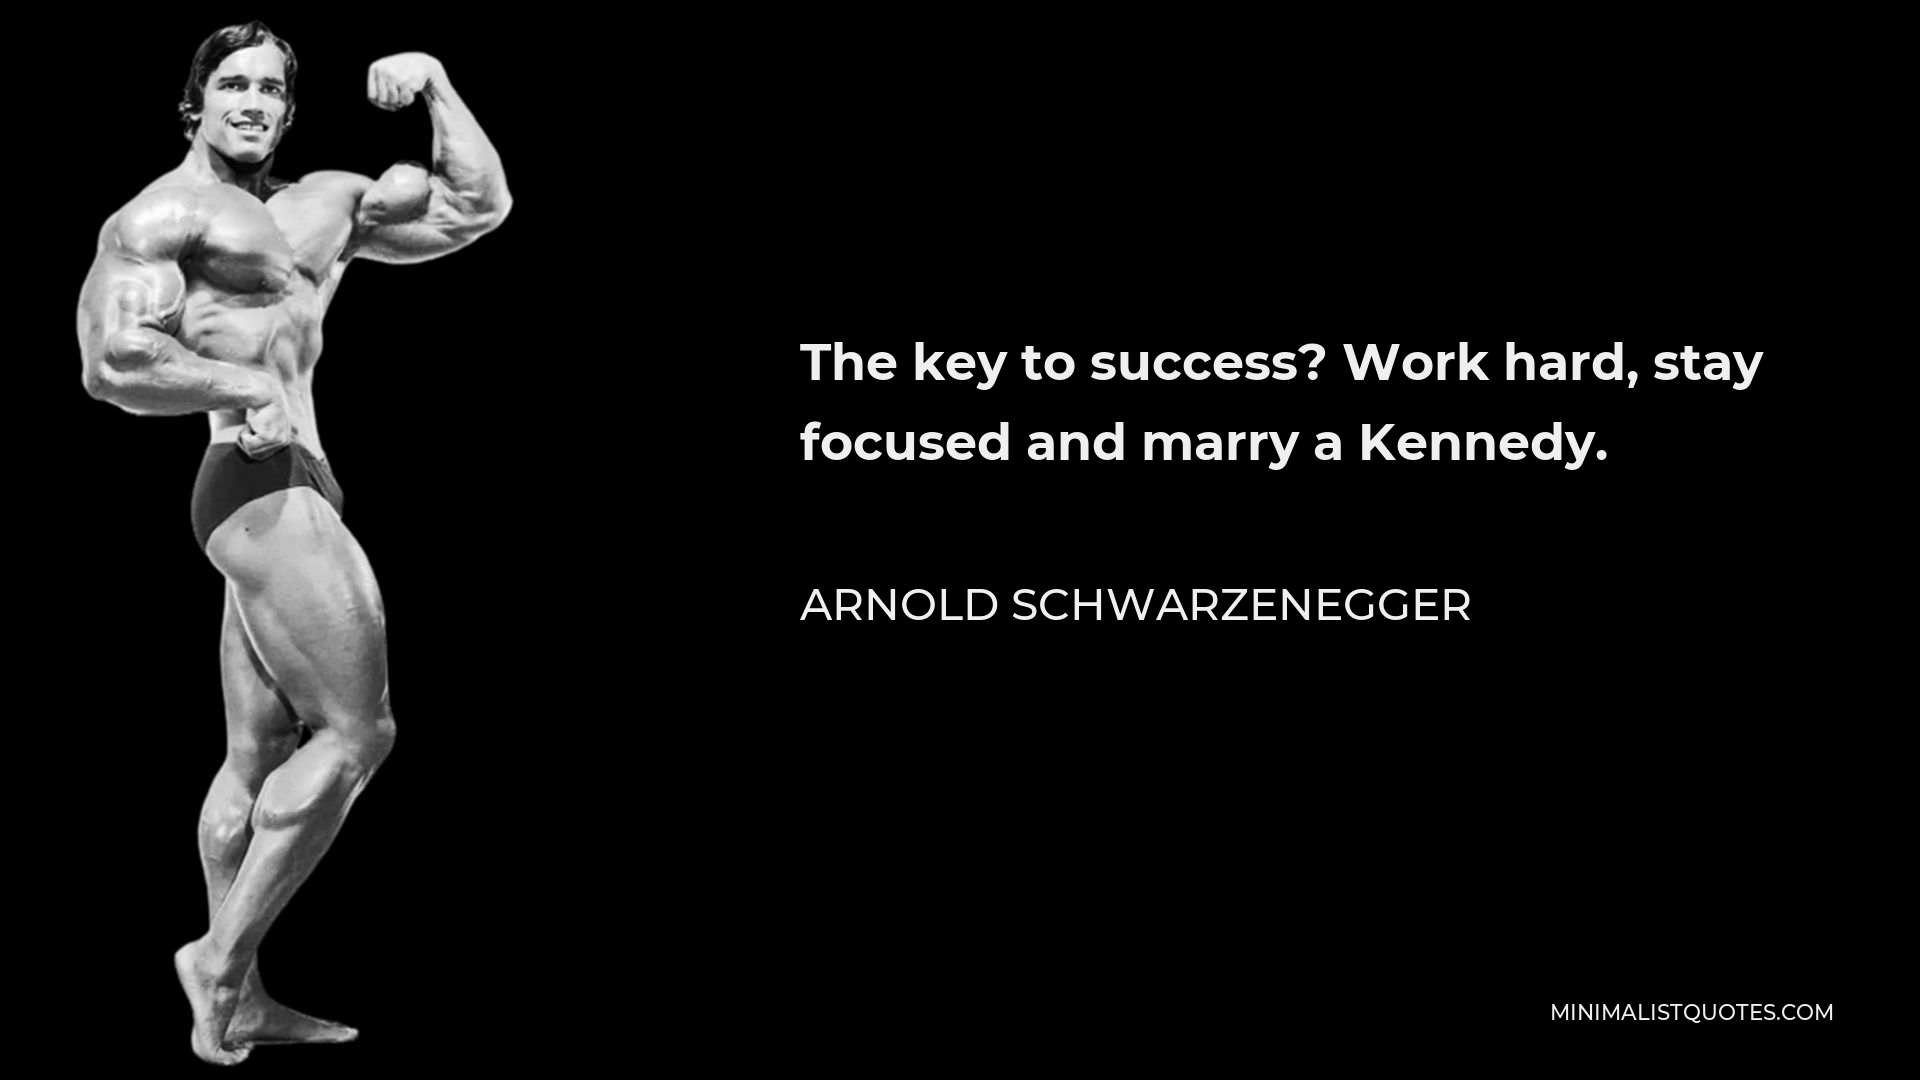 Arnold Schwarzenegger Quote - The key to success? Work hard, stay focused and marry a Kennedy.